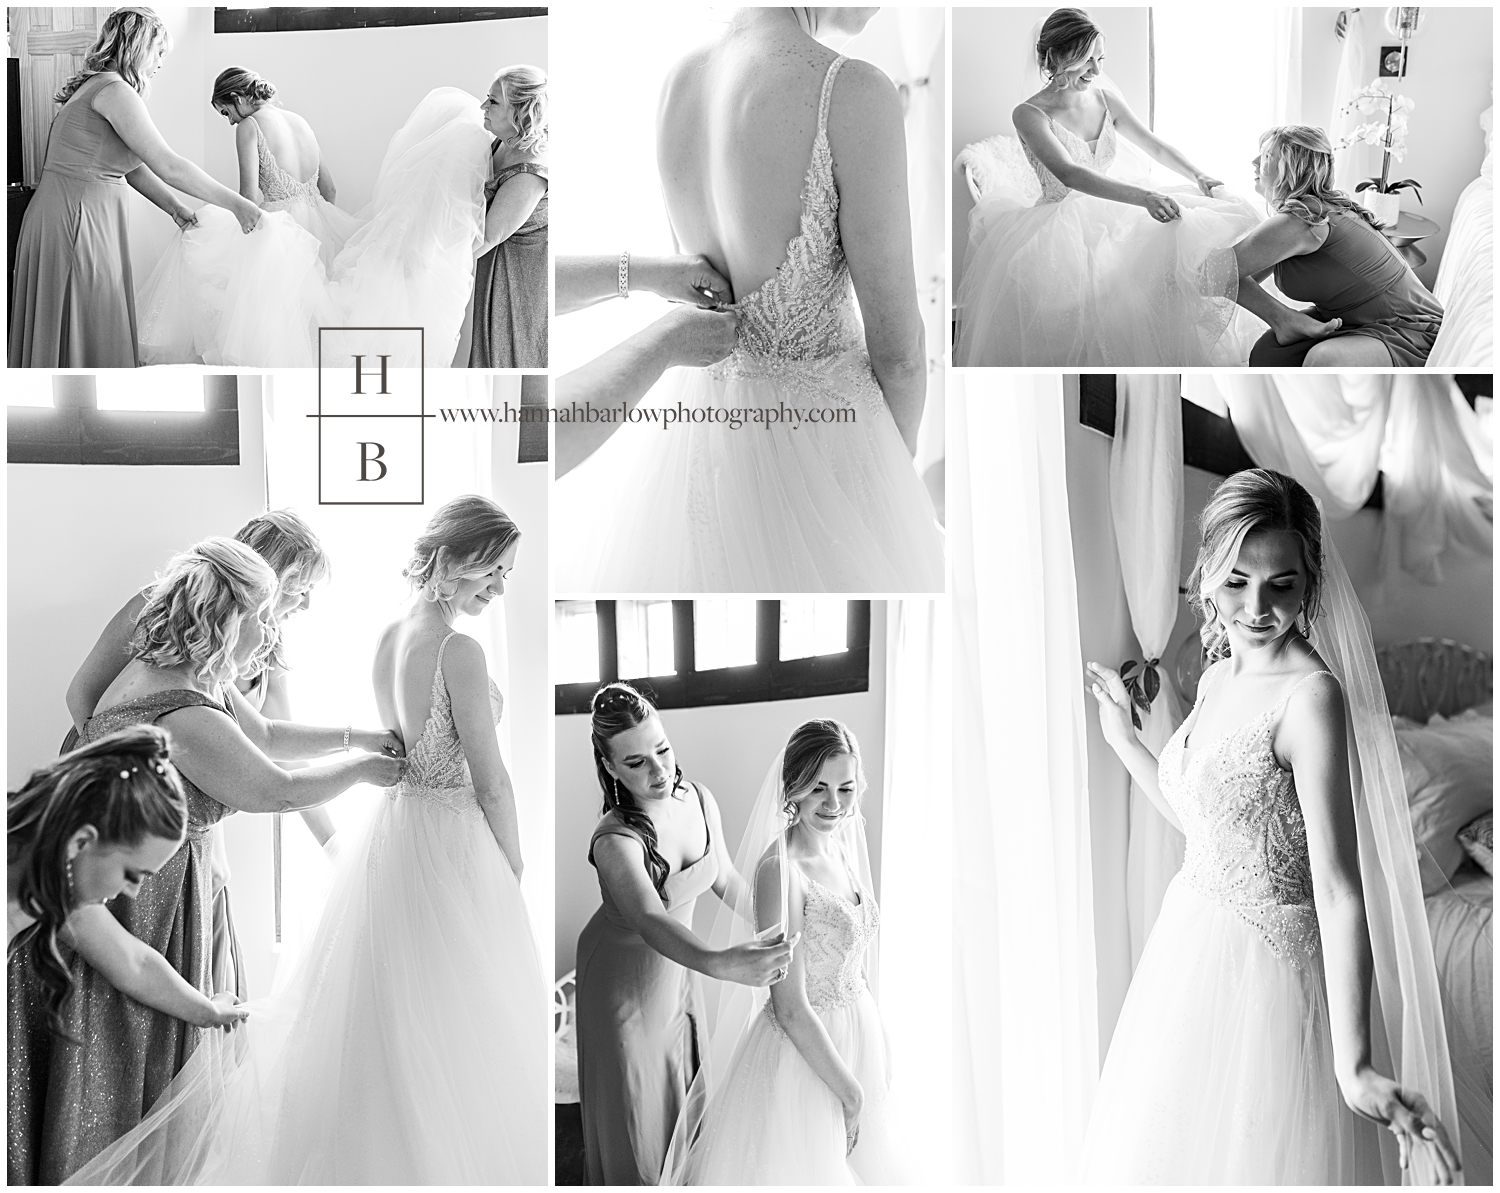 Black and white photos of the bride getting ready with mom and sisters in a bridal suite.